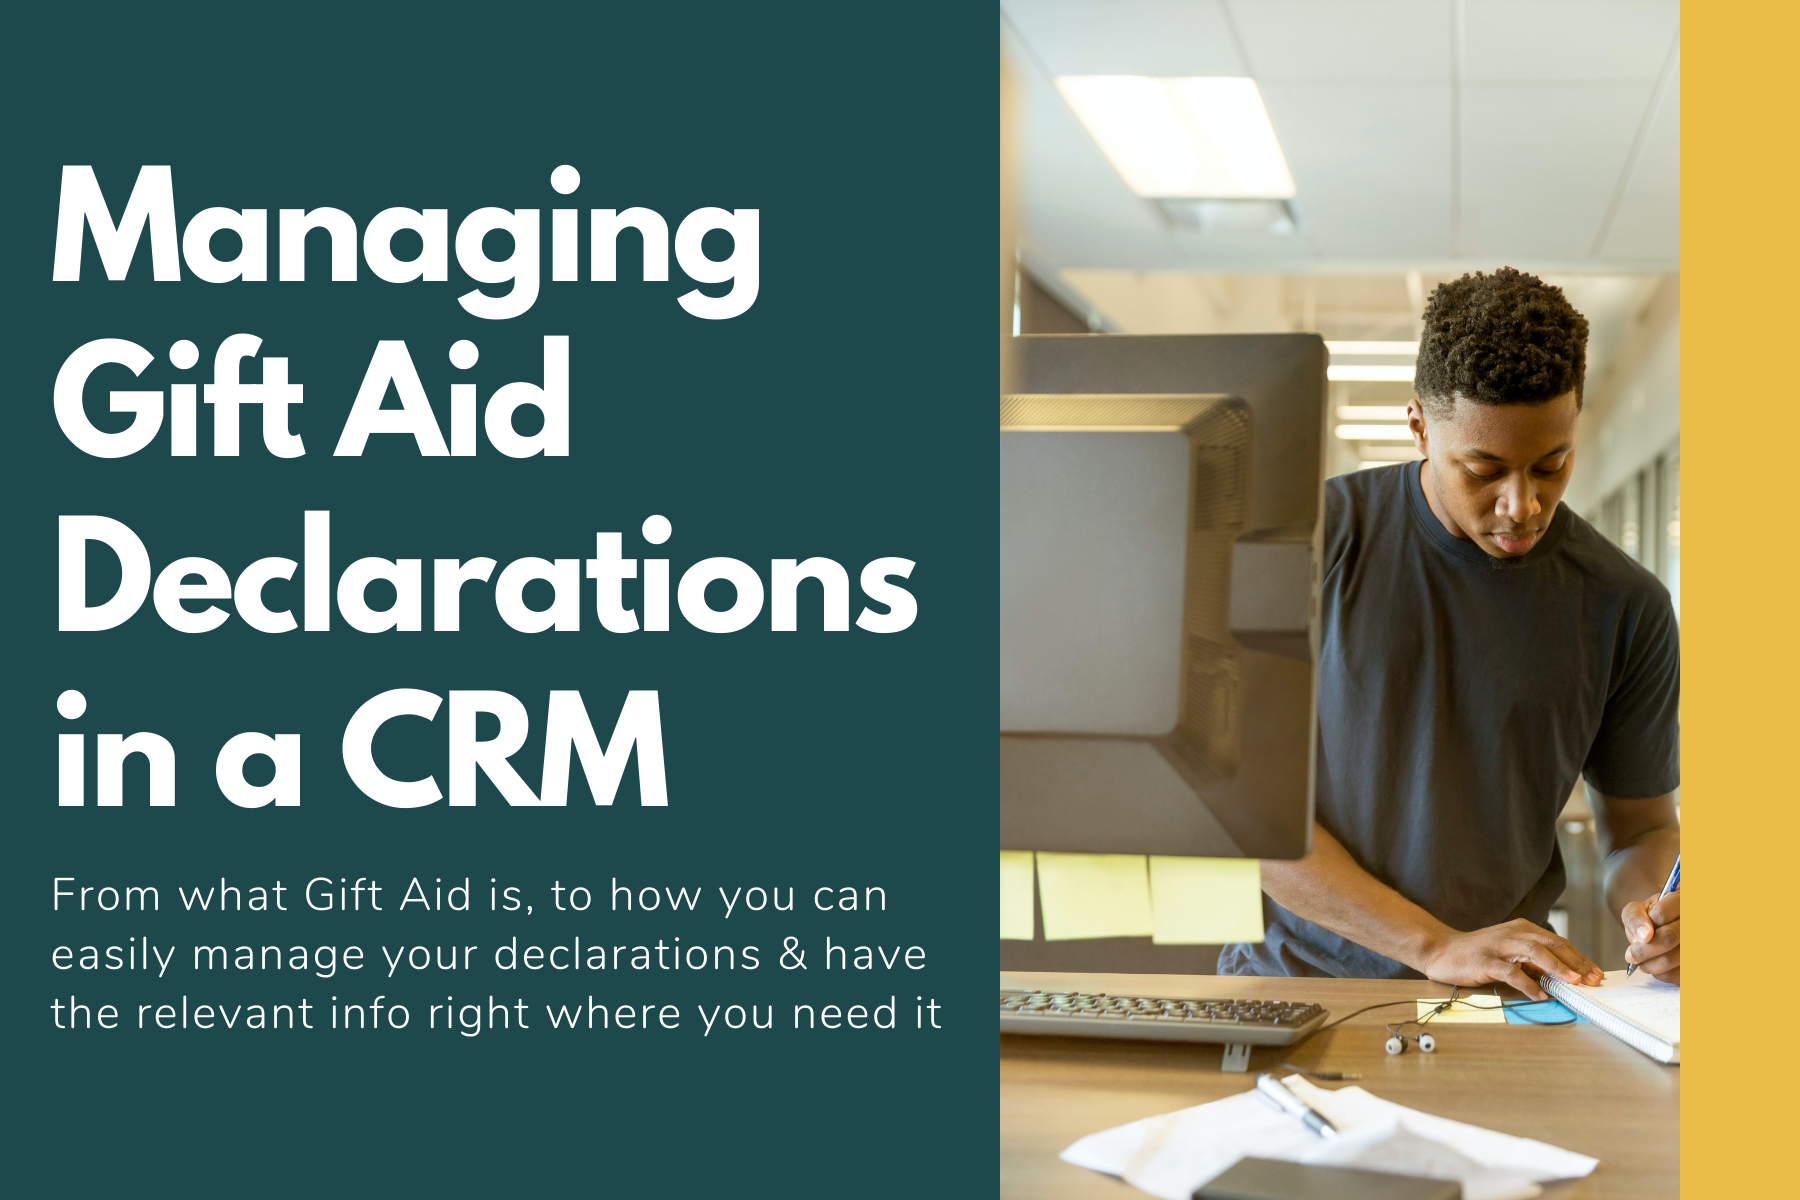 Managing Gift Aid Declarations in a CRM